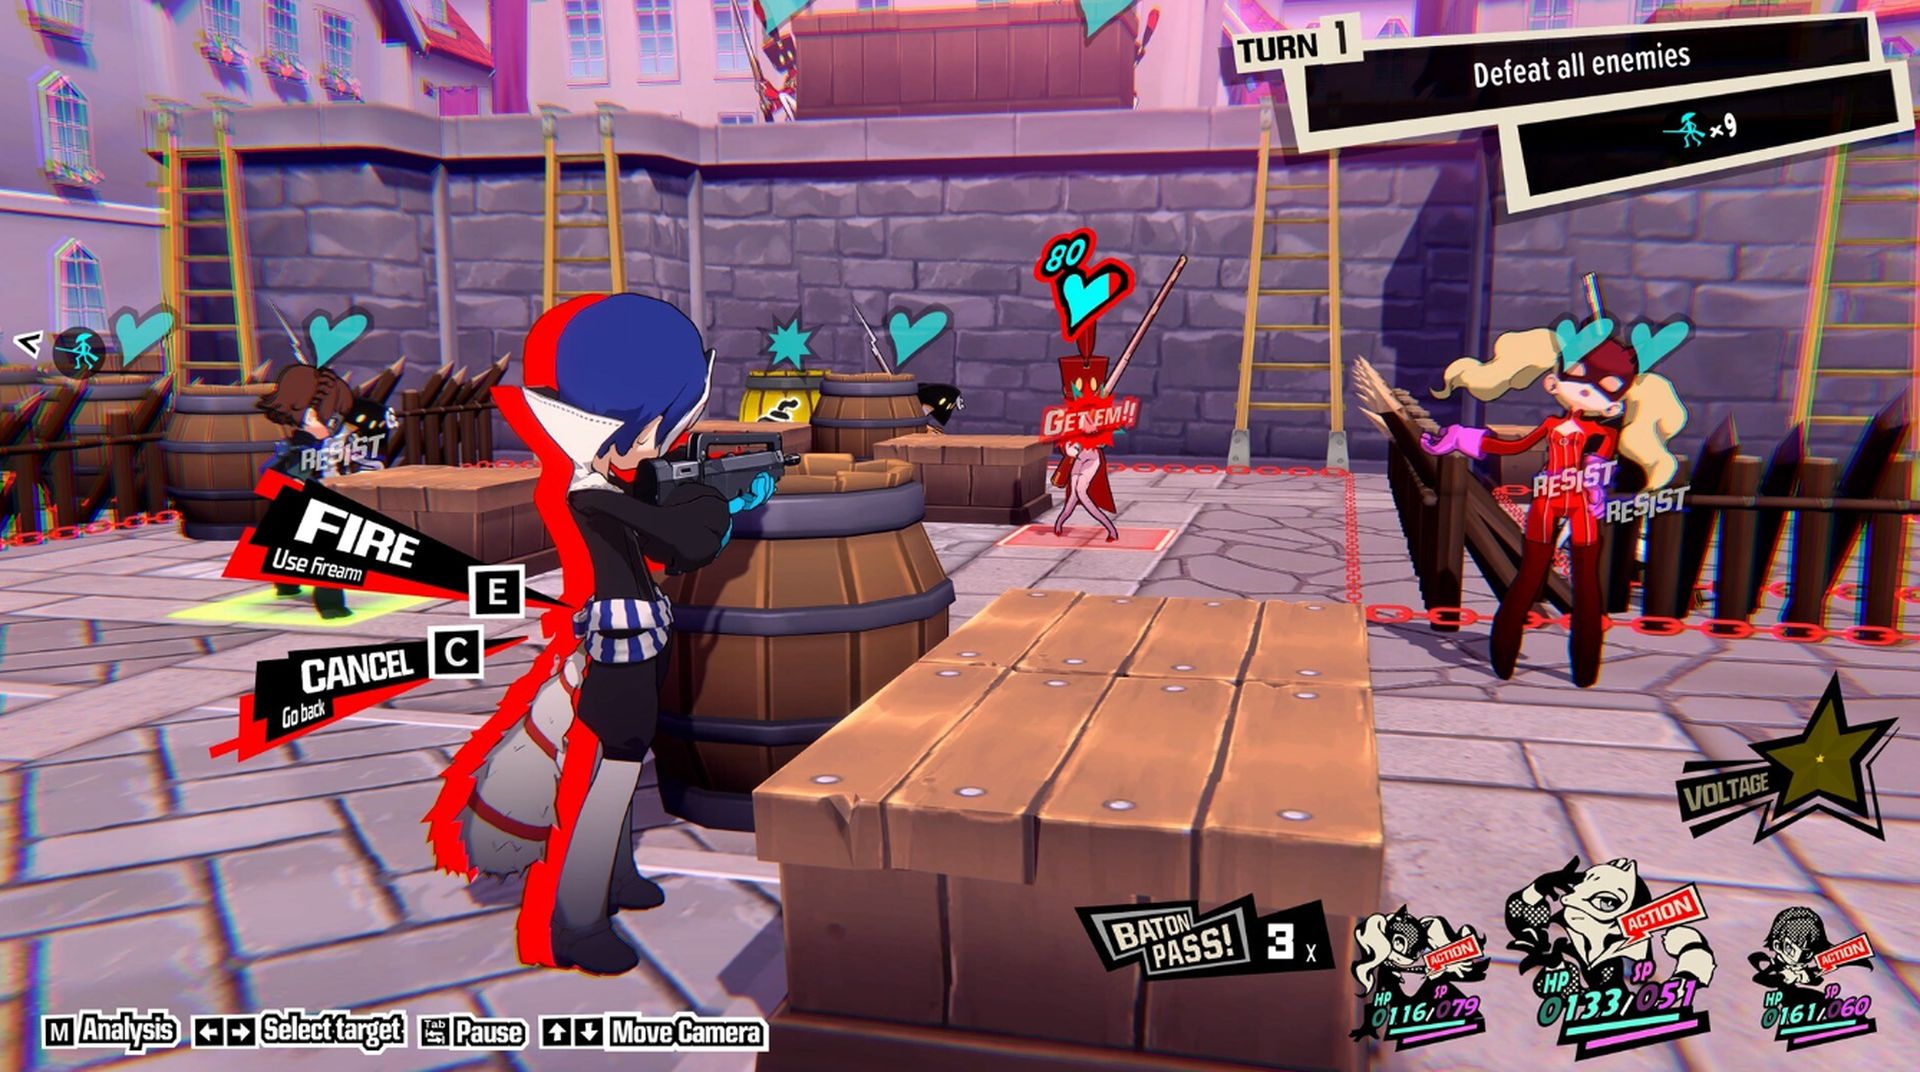 Persona 5 Tactica Quest 5: A step-by-step guide to victory